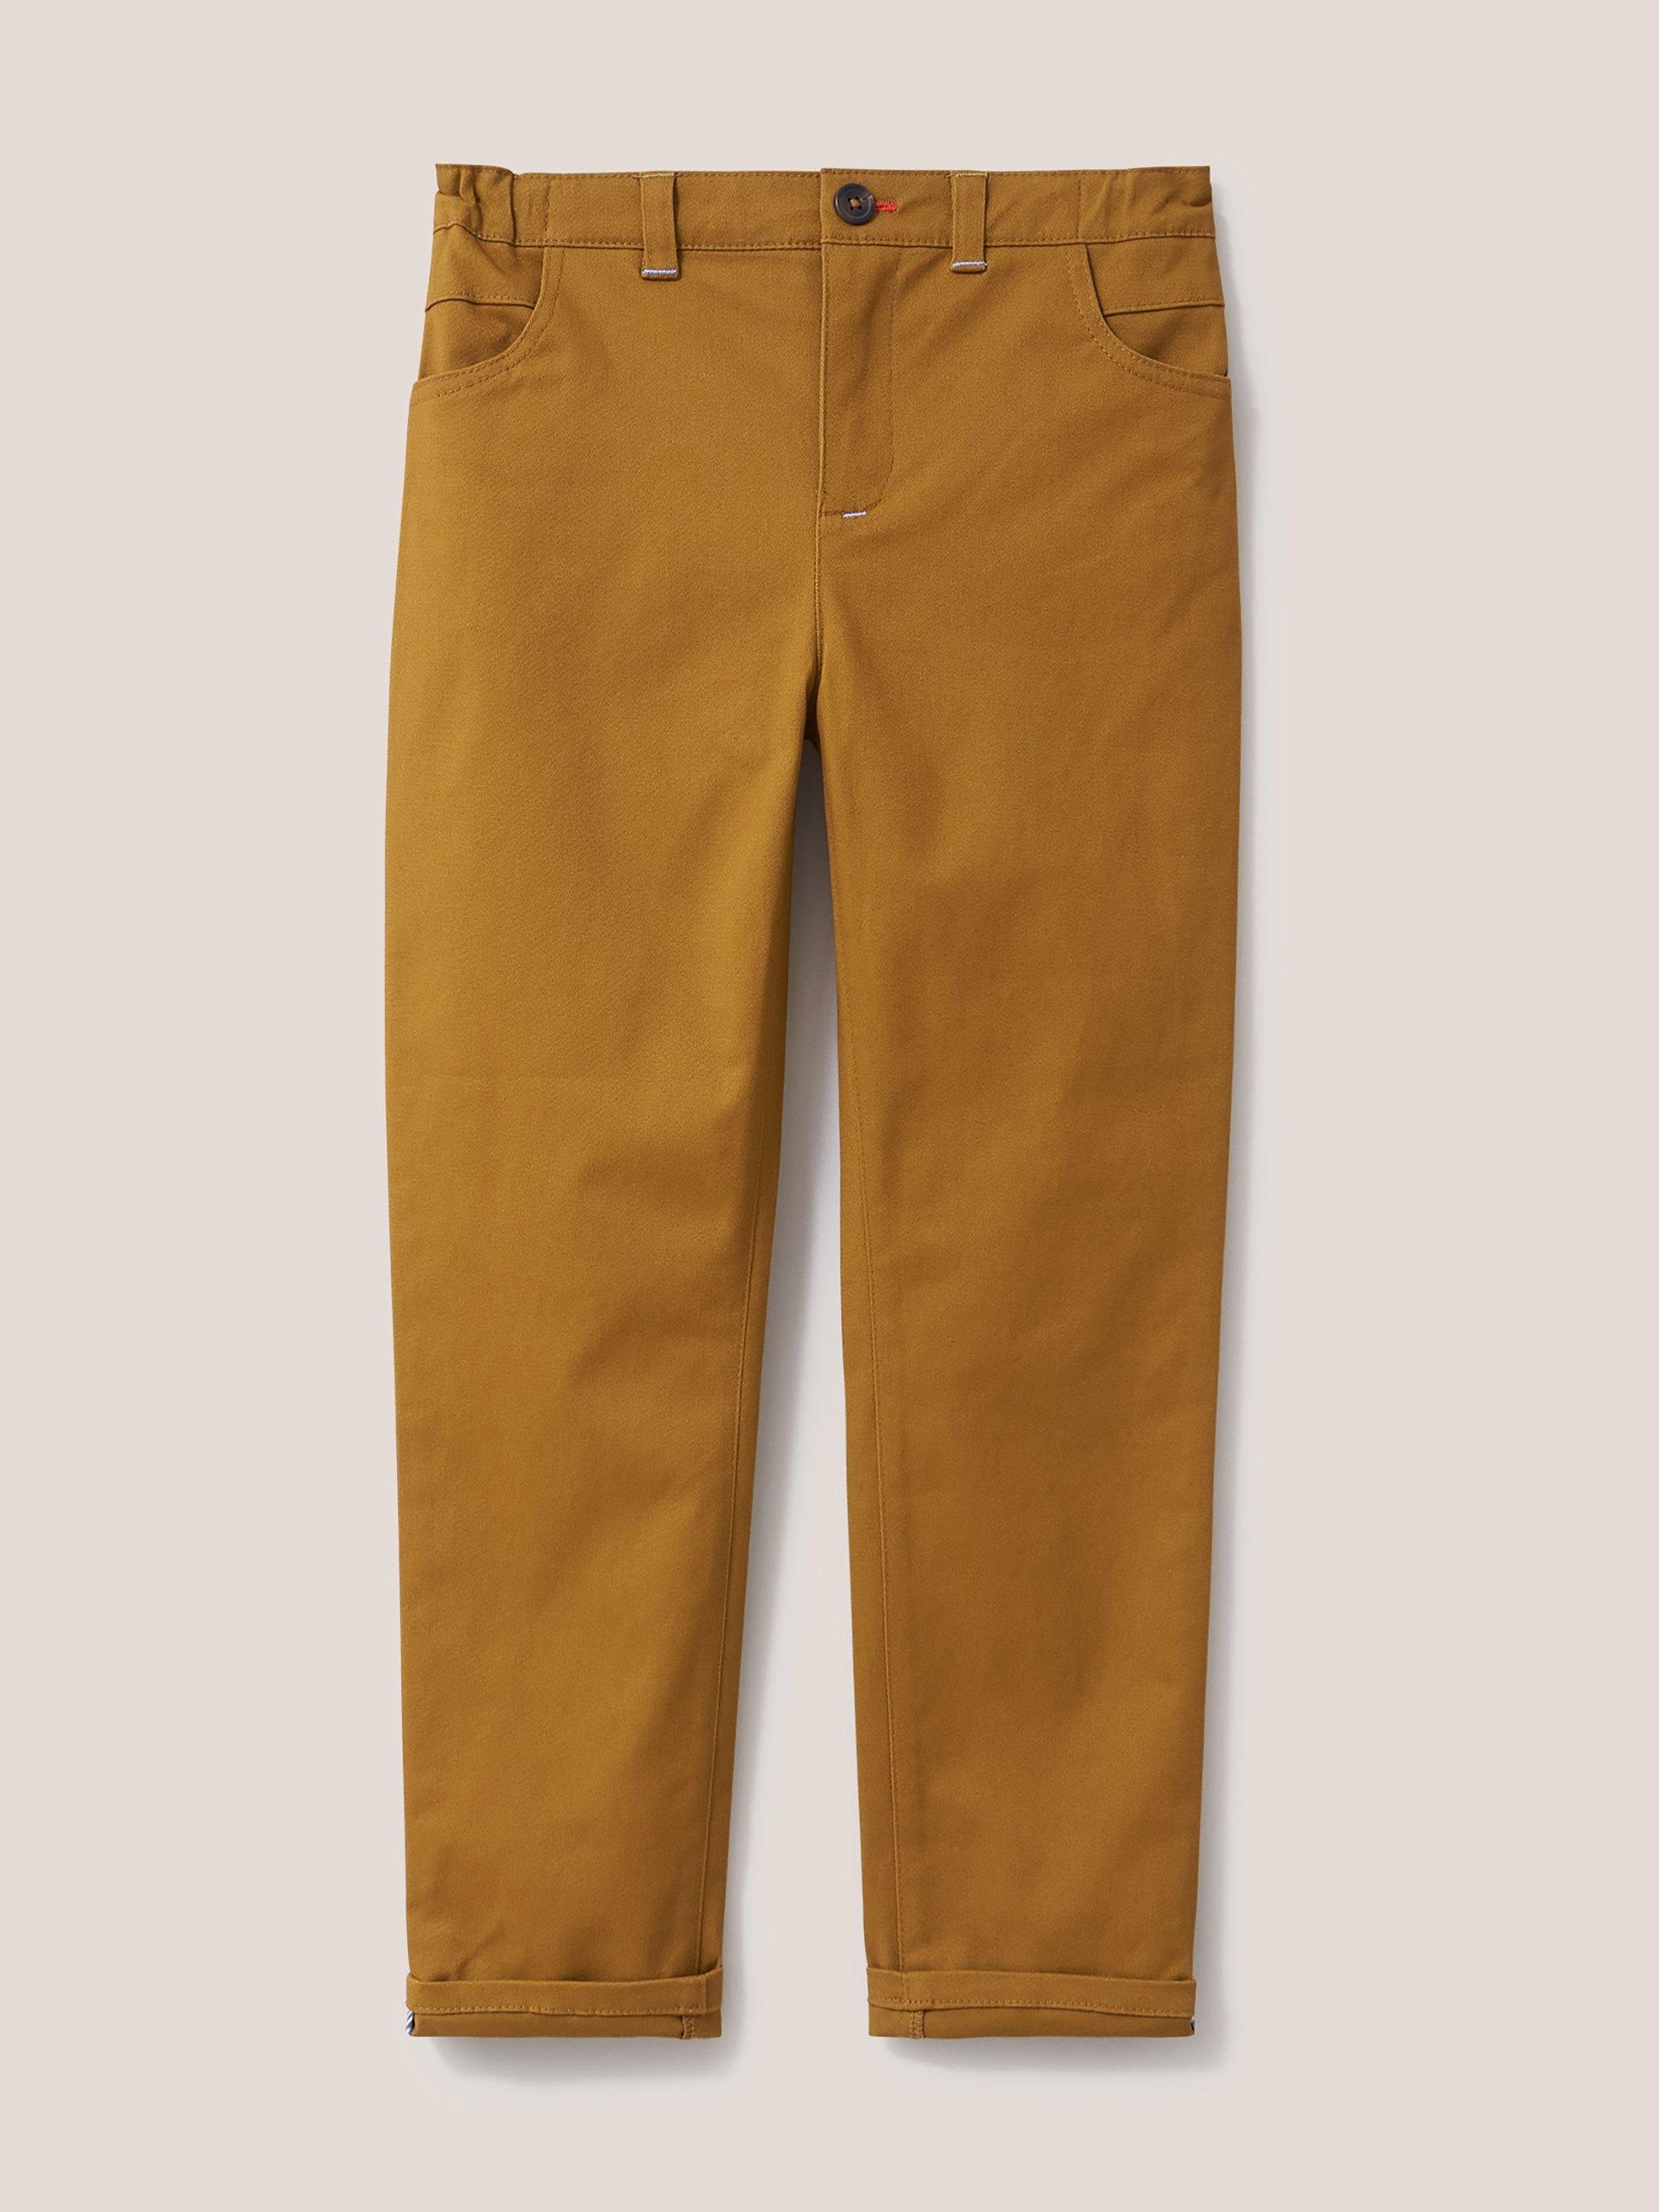 Cole Chino Trouser in DK NAT - FLAT FRONT